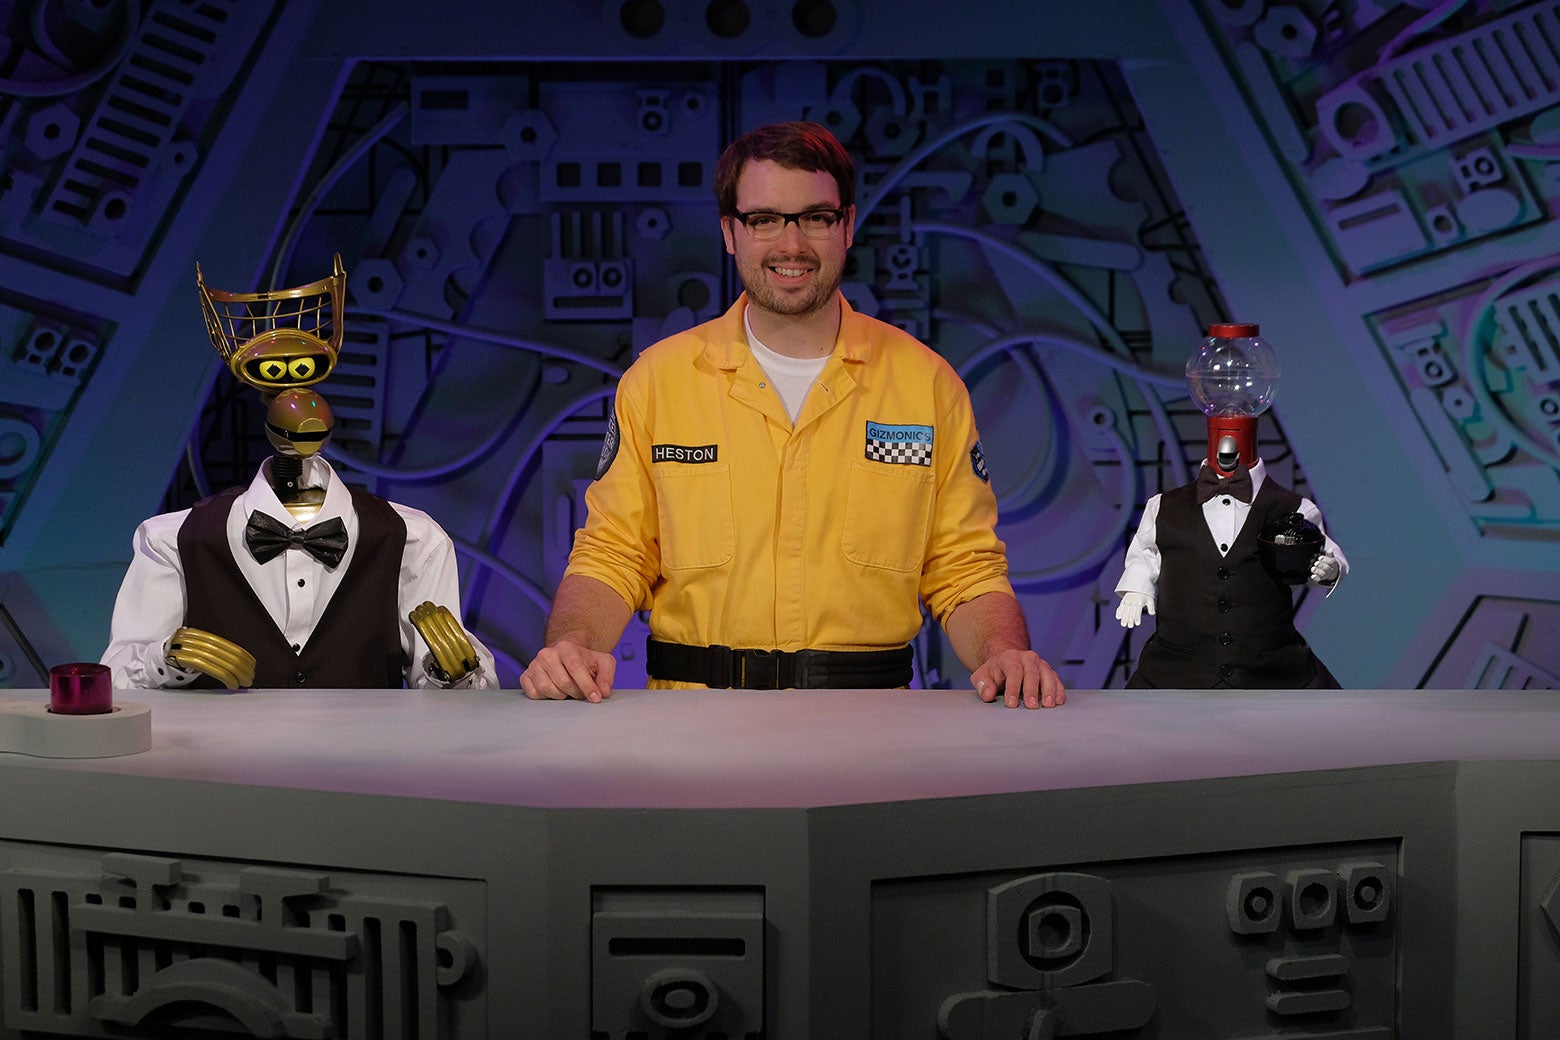 Scene from Mystery Science Theater 3000.